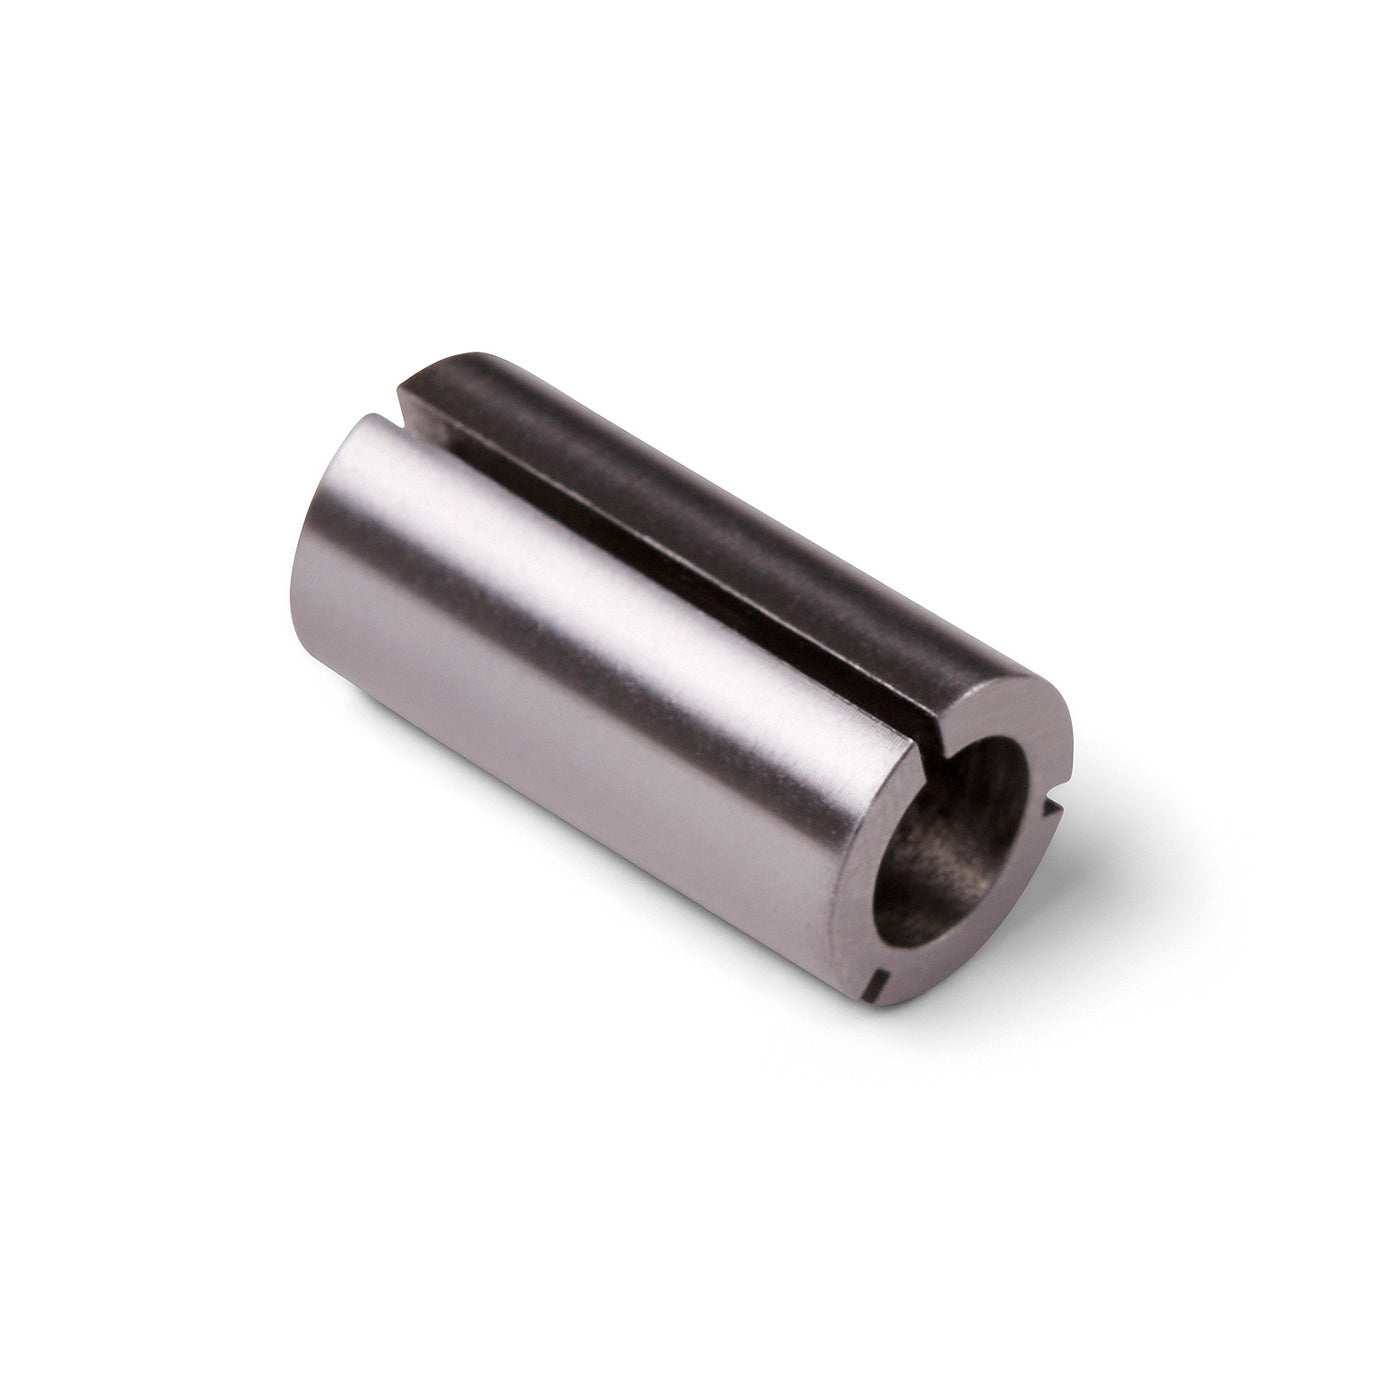 Collet Reduction Sleeve 1/2" to 8mm